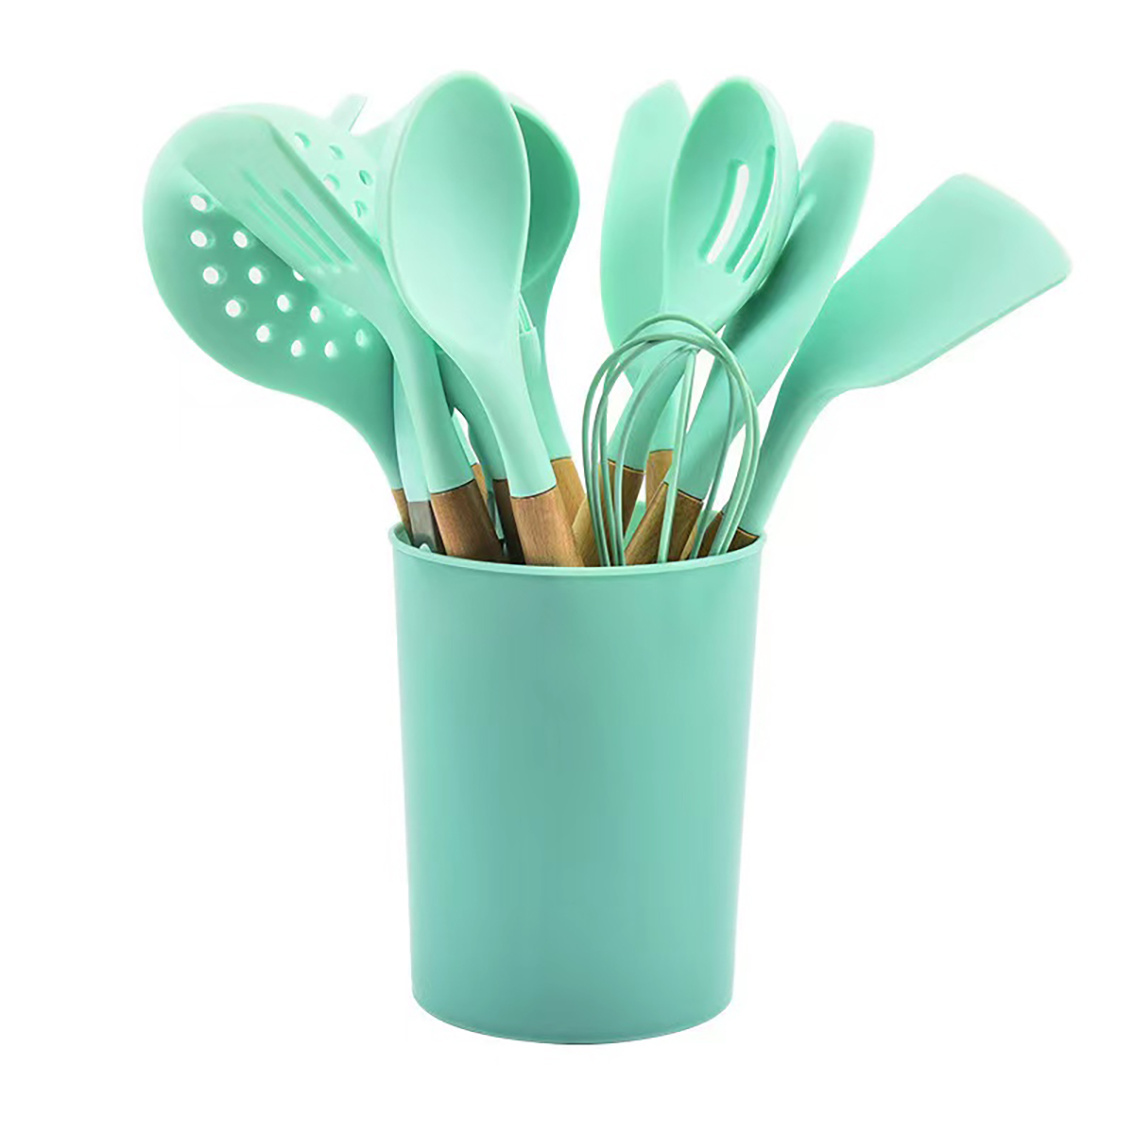 Silicone Kitchen Utensils Set, 11PCS Silicone Cooking Utensils, Mint Green Silicone  Spatula Spoons Set Turner Tongs with Wooden Handle, Best Kitchen Utensils  for Cooking 